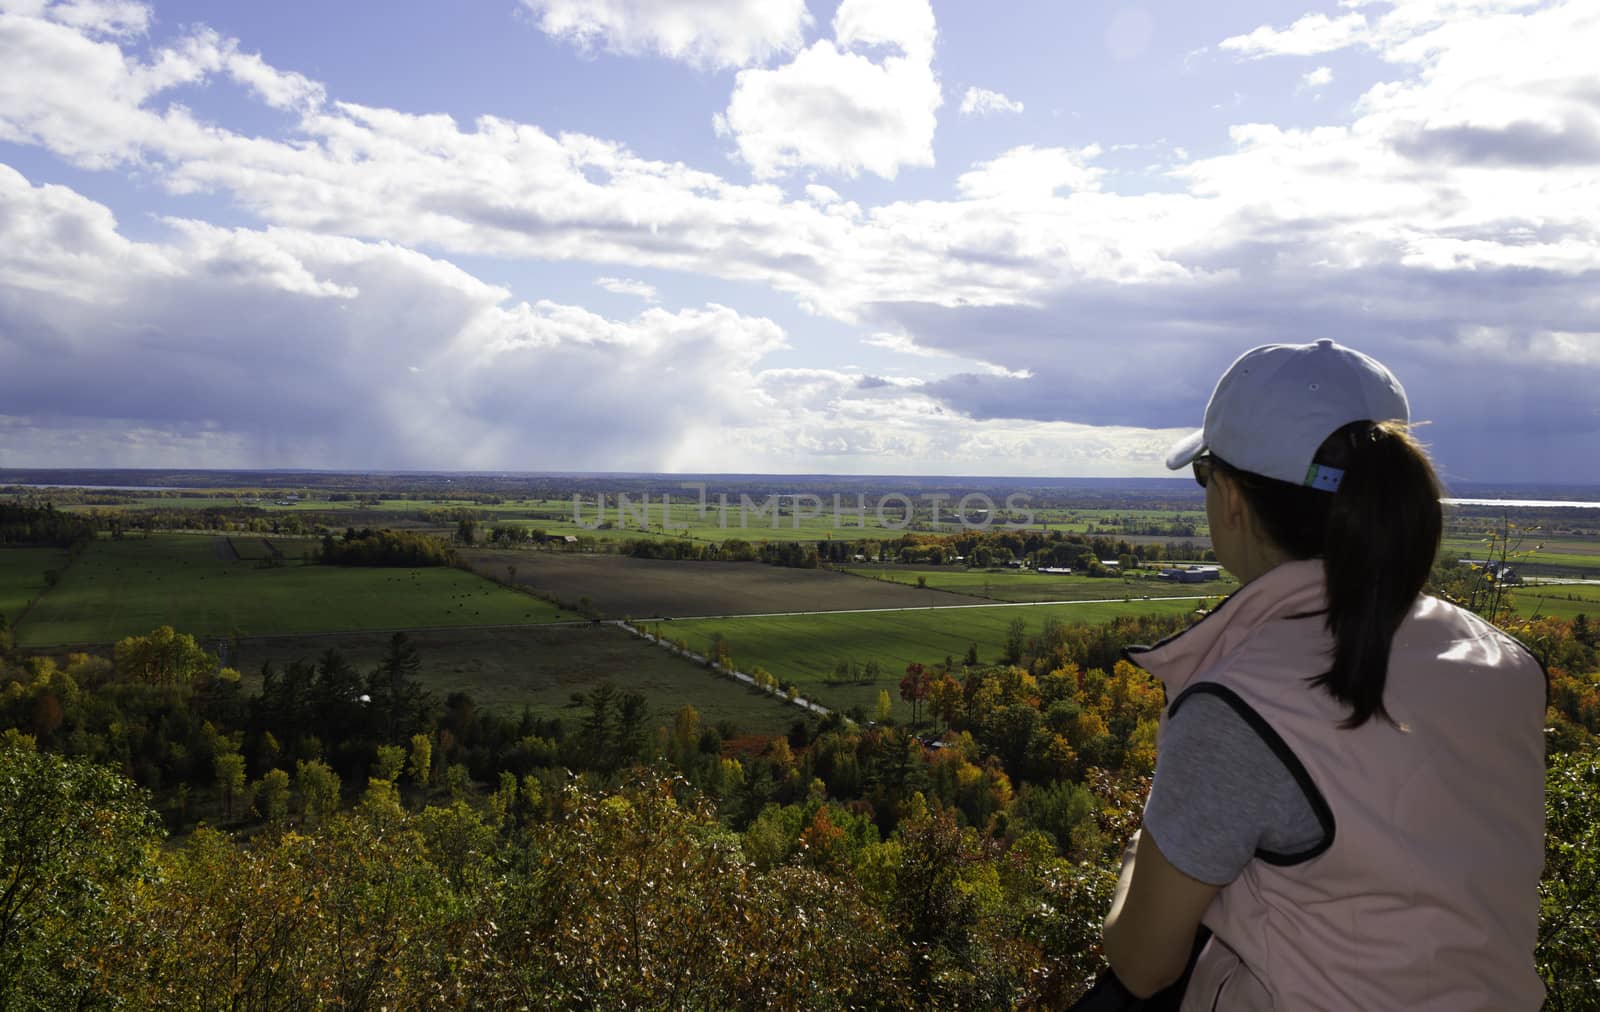 Young woman looks out on the rural scene